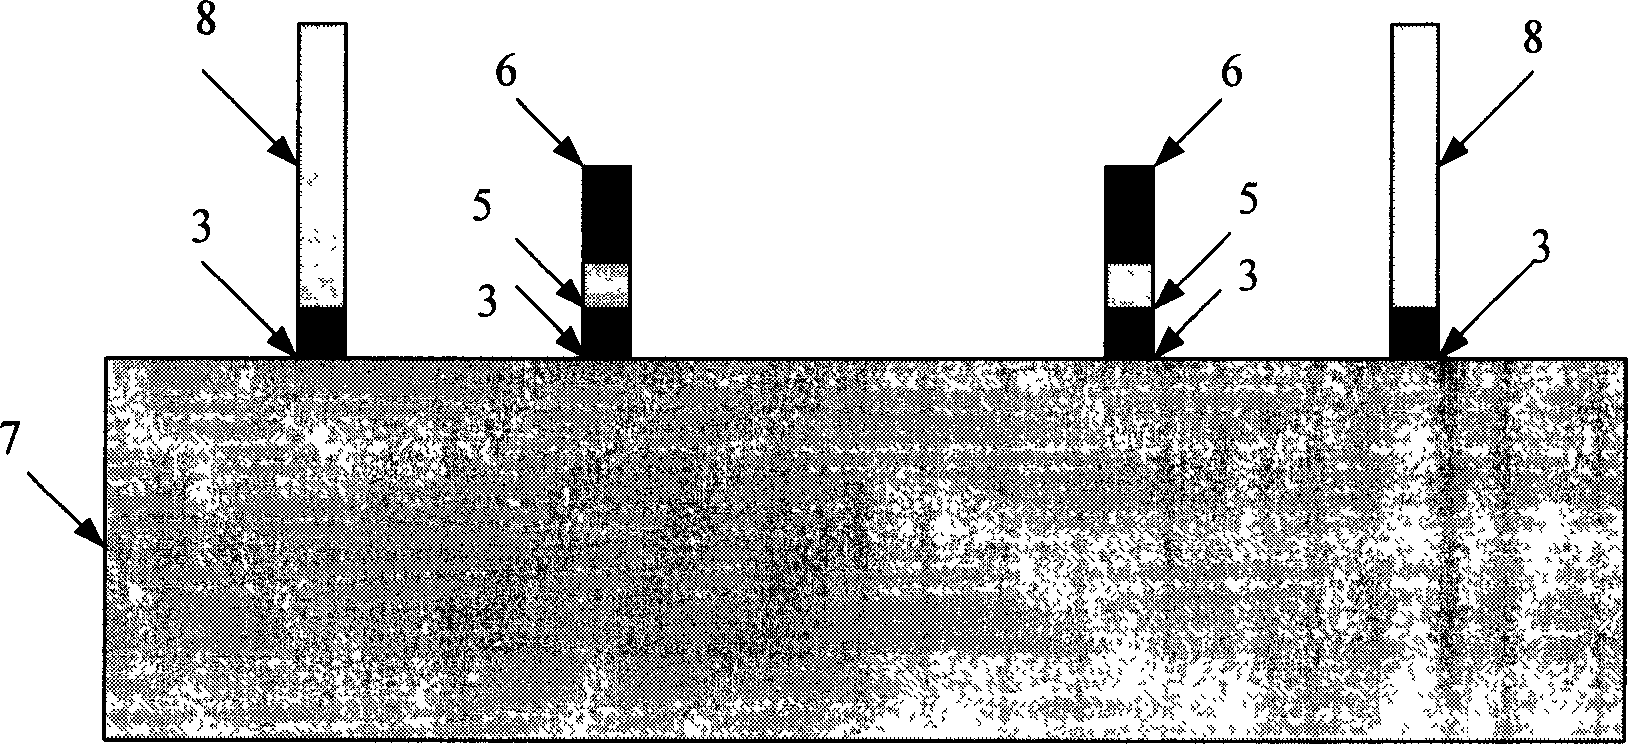 High-precision three-dimensional micro-assembling method and assembly parts based on MEMS